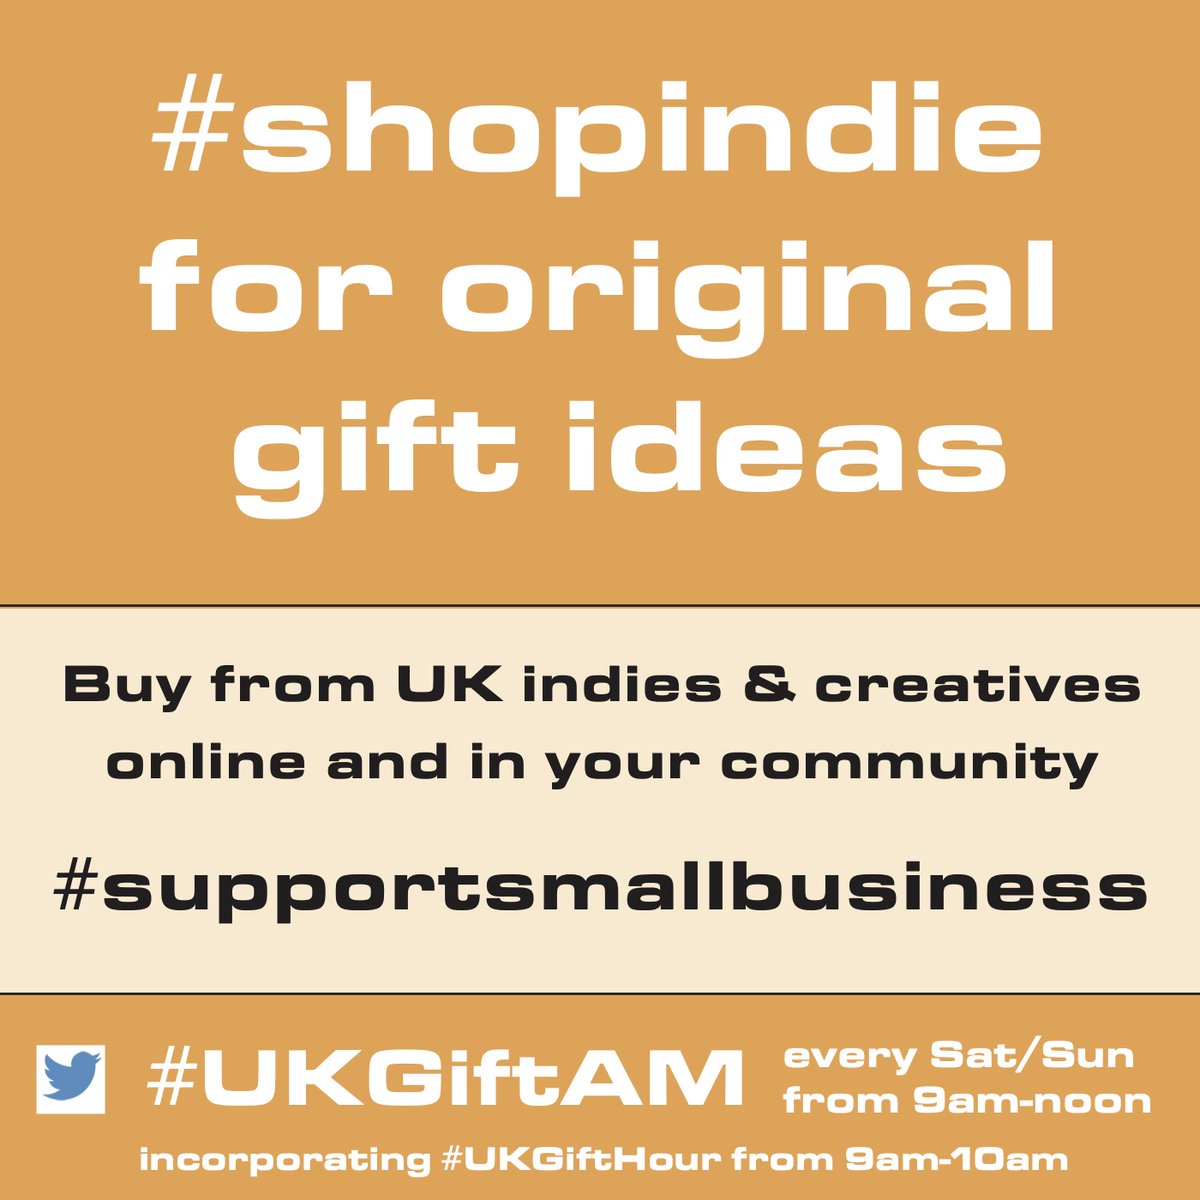 Is there a more rewarding way to start #SundayMorning than to #supportsmallbusiness and #planahead with UK indies & creatives? 🙂 Then you're invited to join the #shopindie crowd for #UKGIftHour #UKGIftAM at 9am - friendly company and delightful #giftideas 🤗🎁